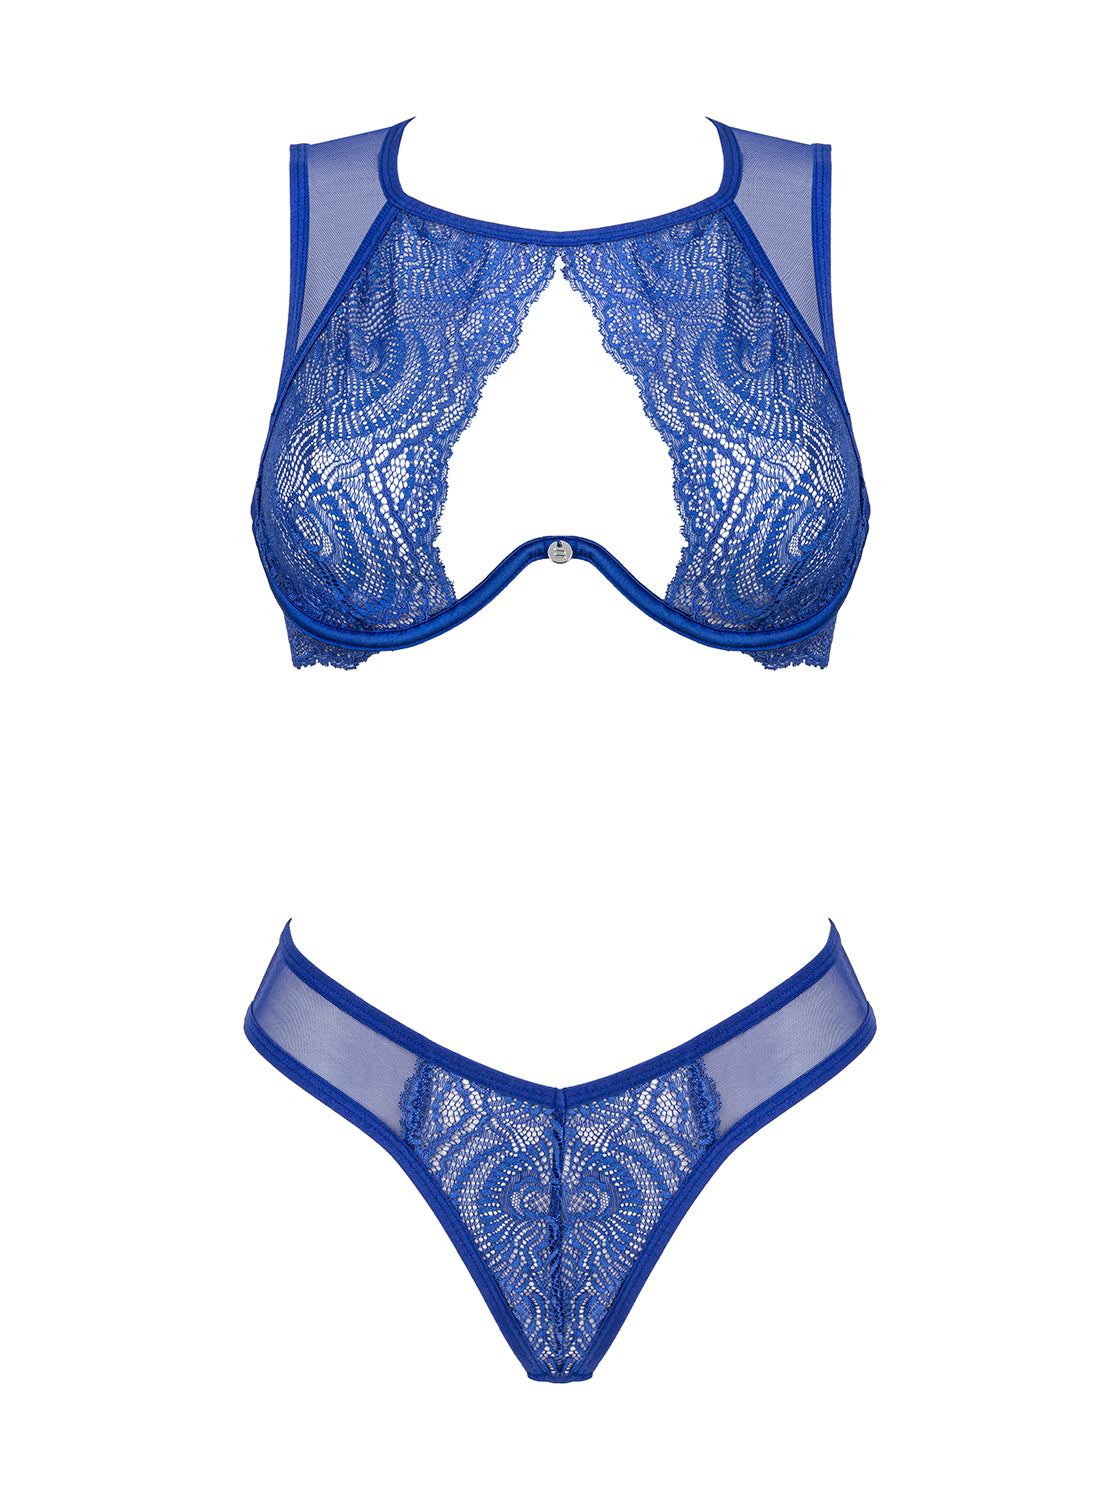 Giselia fantastic set made of delicately translucent and elastic material in blue with elegant lace elements